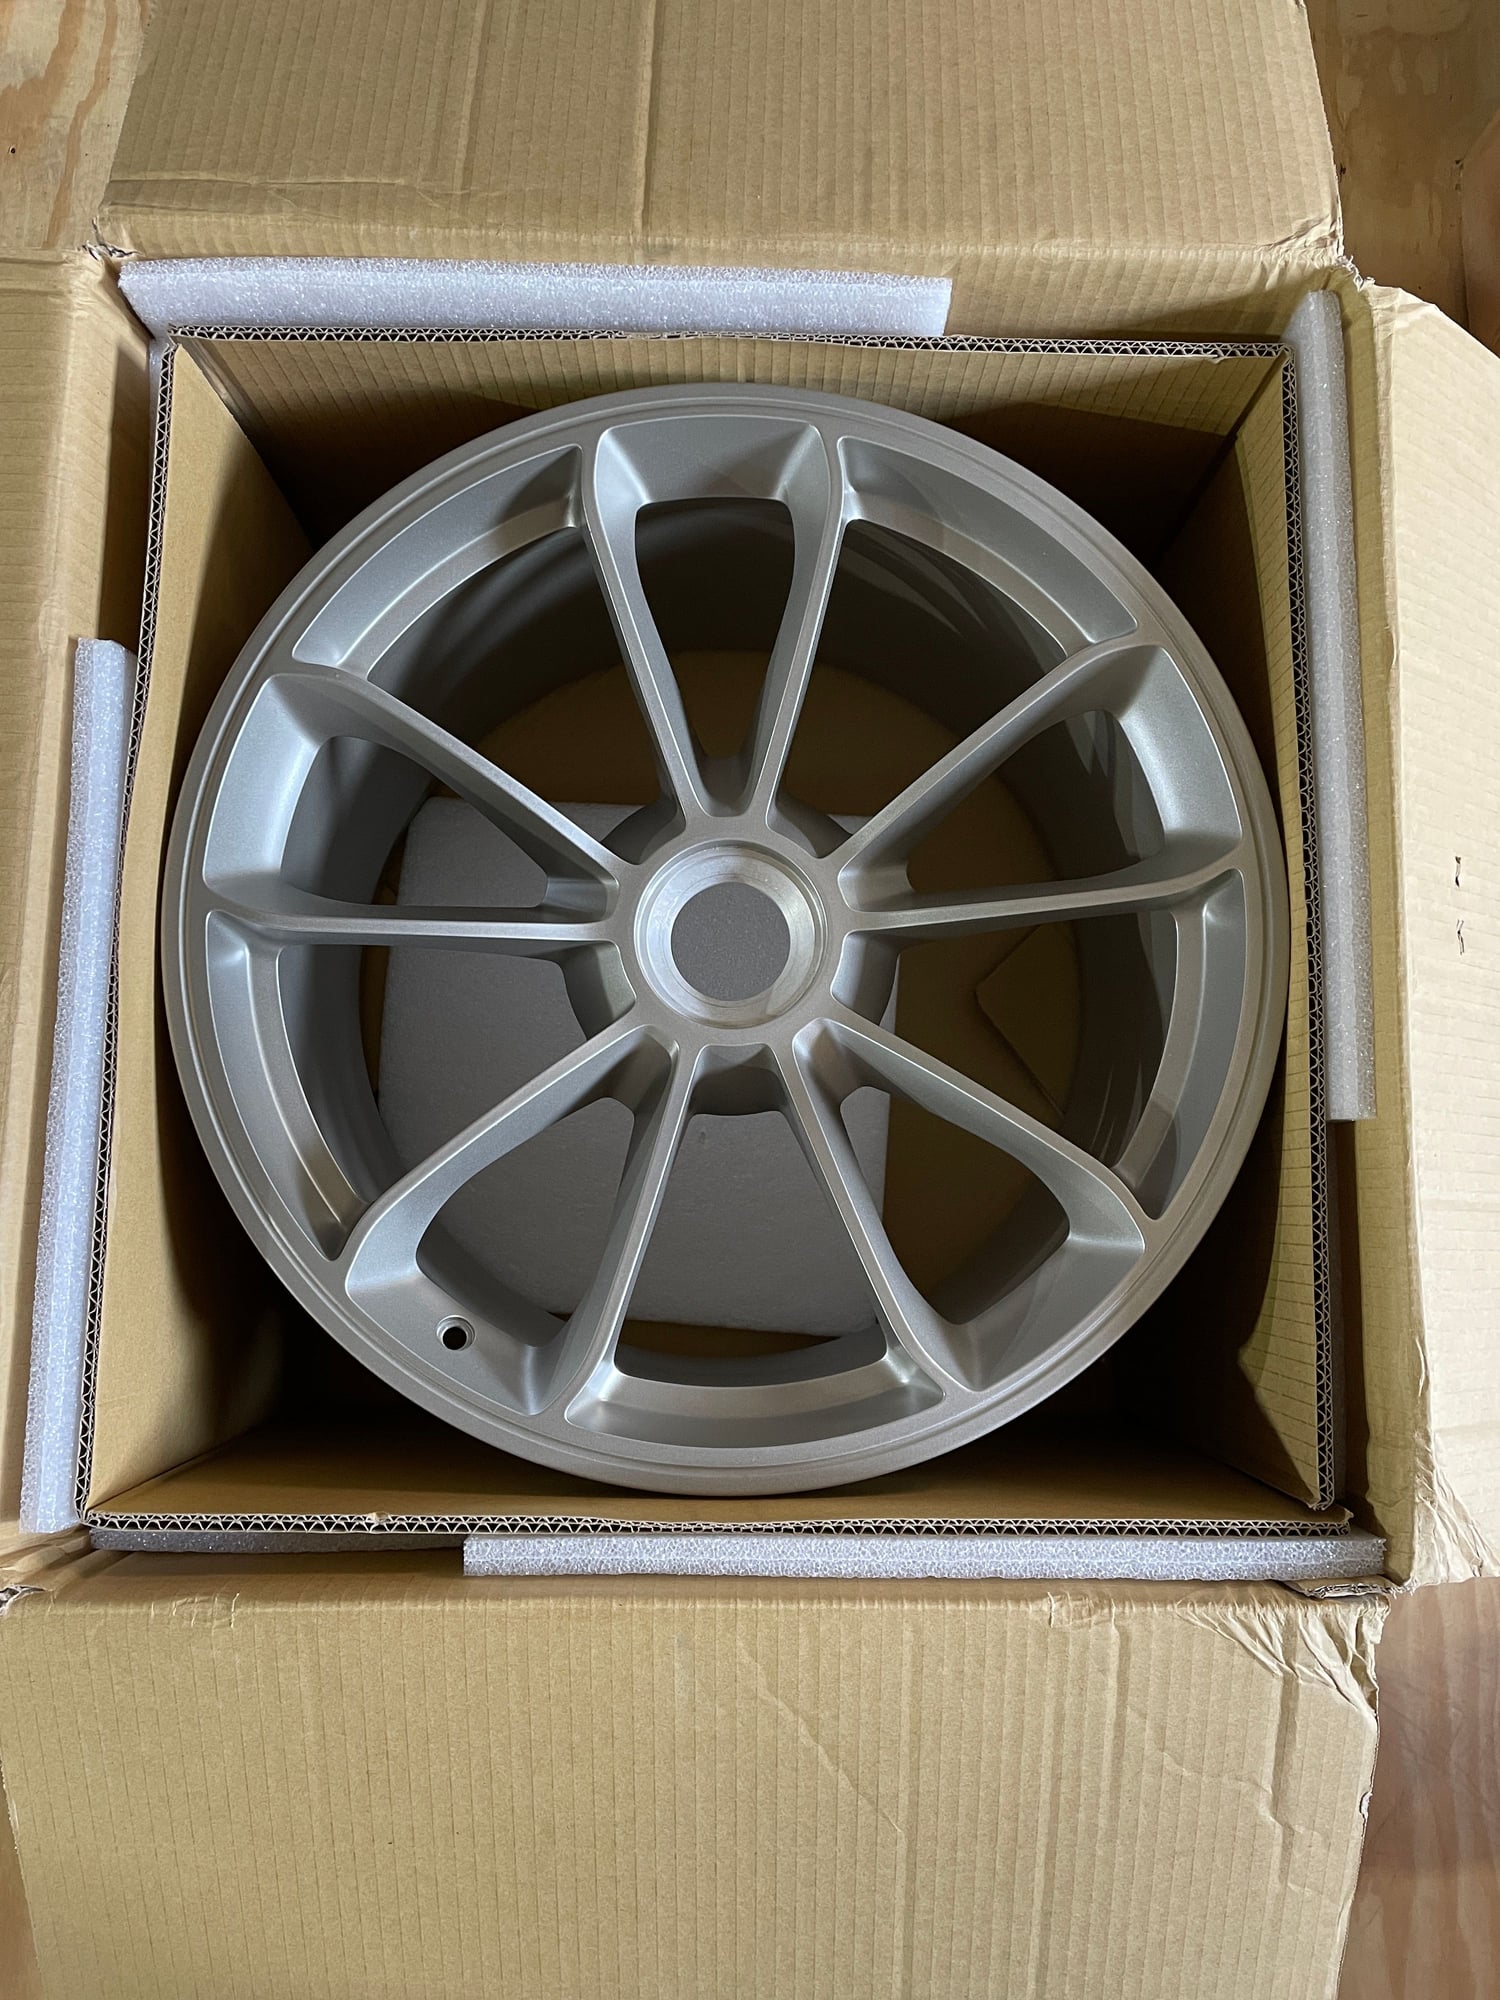 Wheels and Tires/Axles - 991 GT3 Centerlock Wheels - 9.5/10 Condition - Used - 2014 to 2019 Porsche 911 - Overland Park, KS 66221, United States